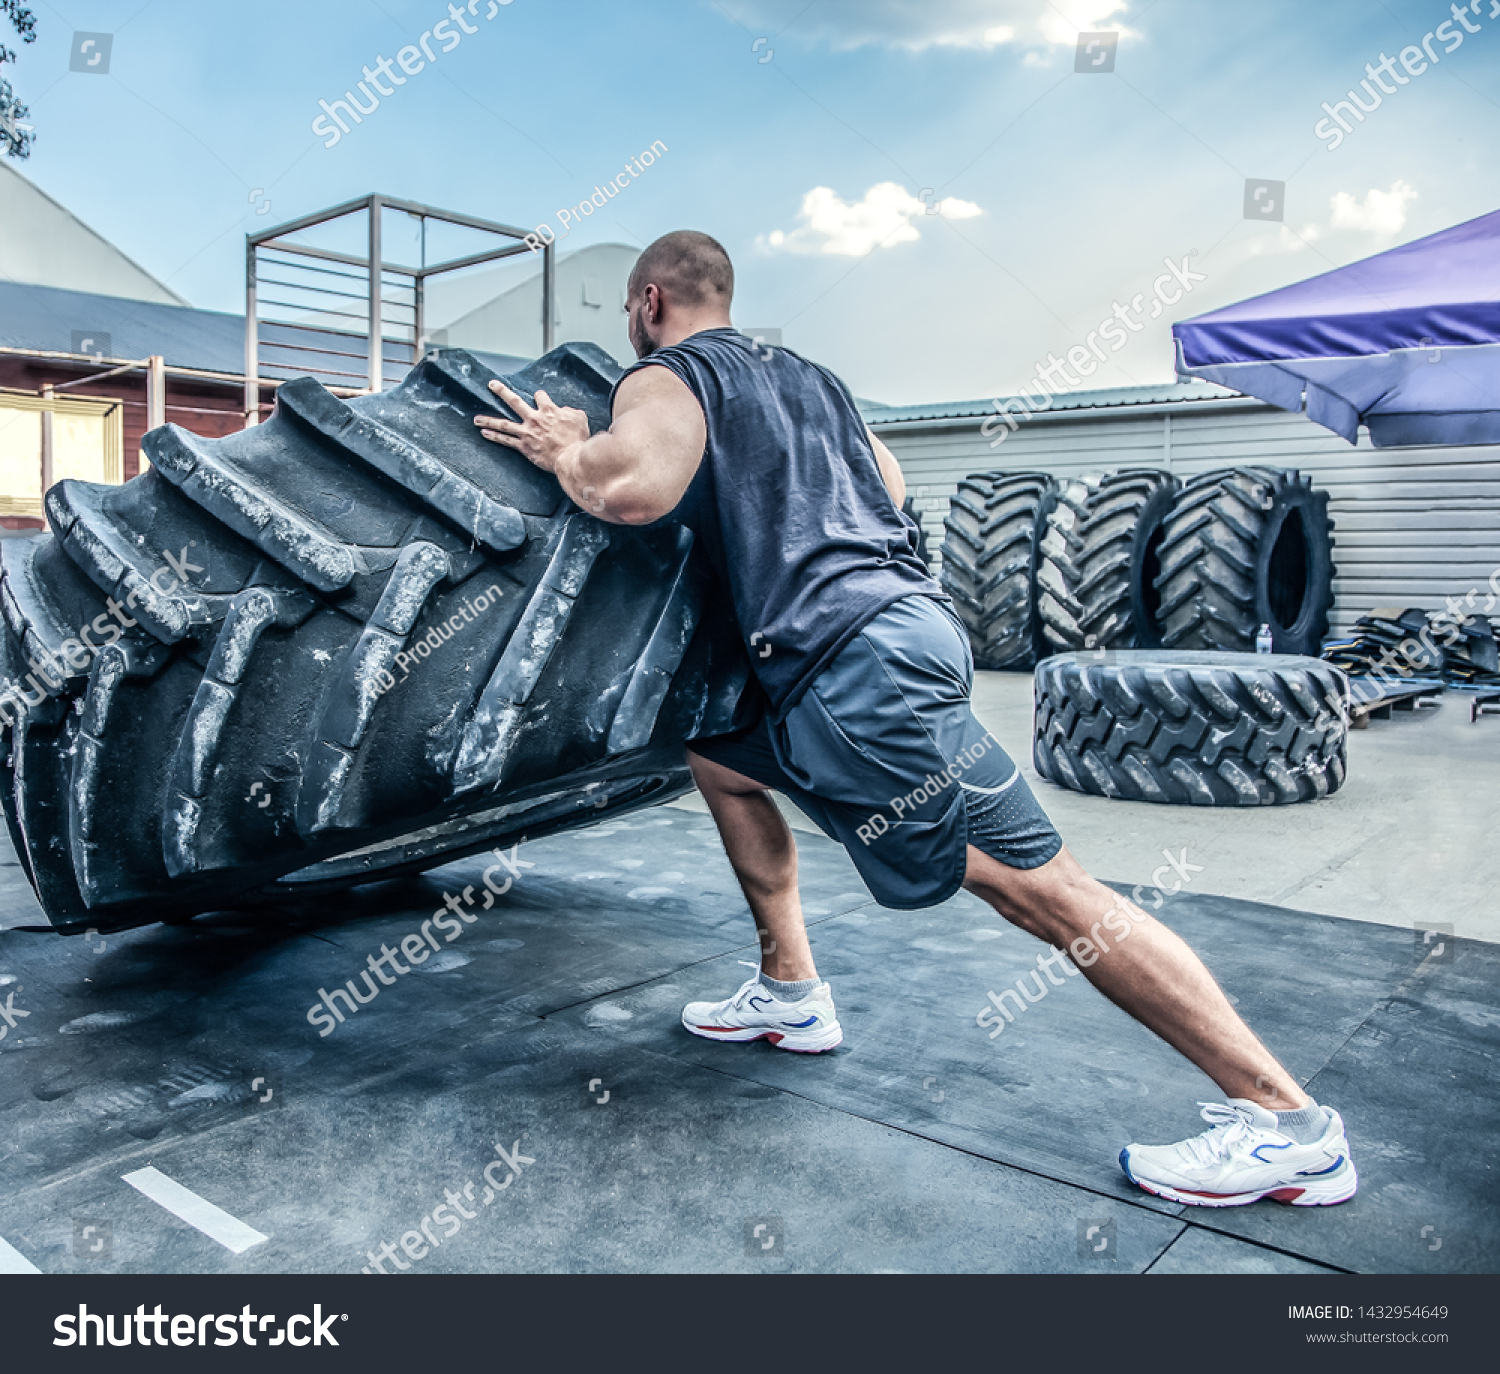 back view of strong muscular fitness man moving large tire in street gym. Concept lifting, workout training. #1432954649